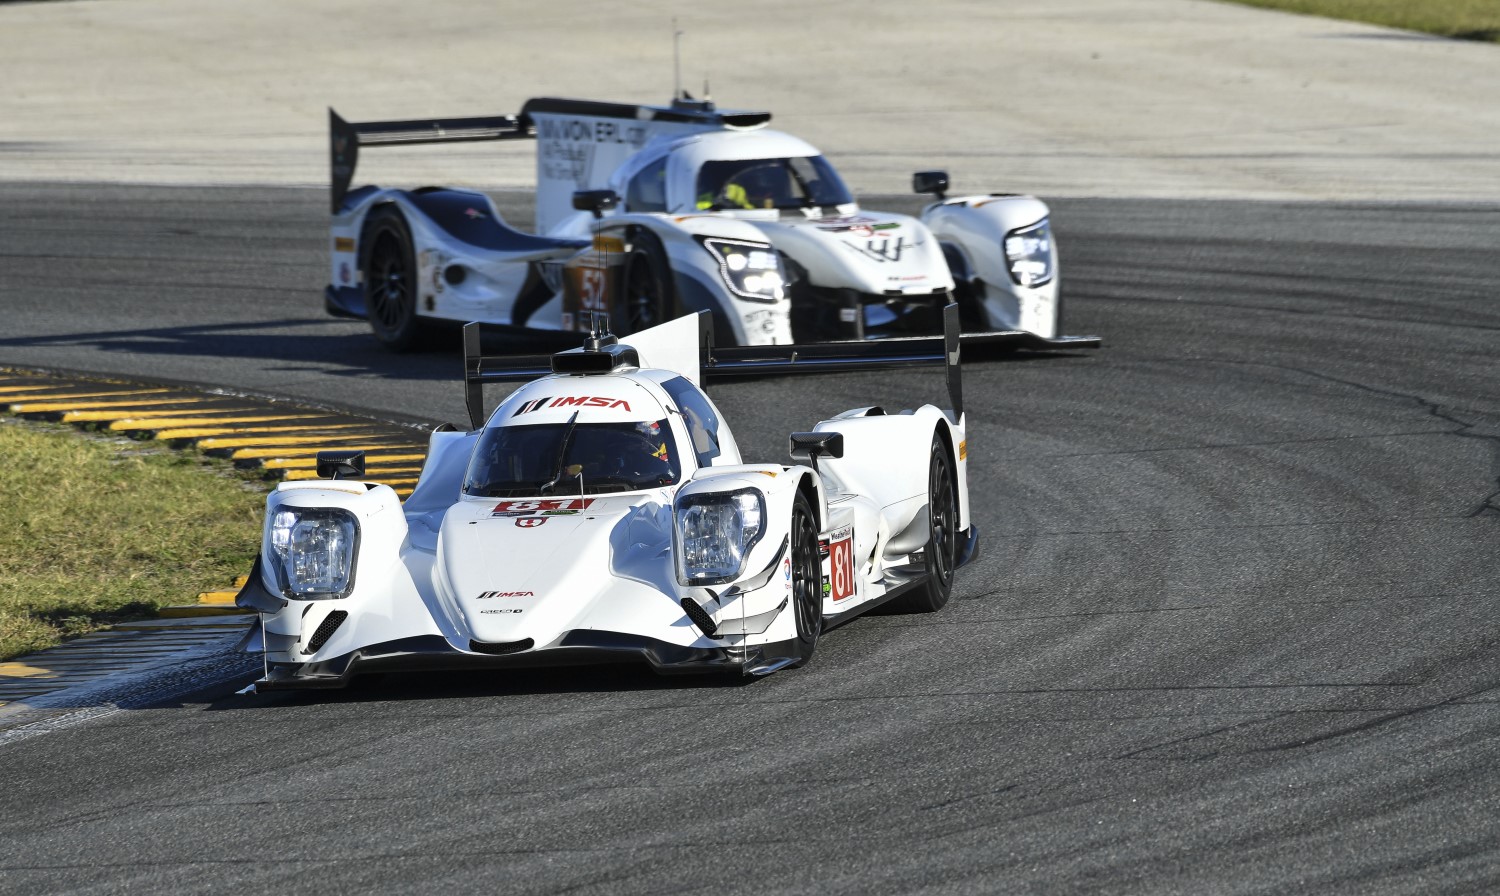 The No. 81 DragonSpeed Oreca turned the fastest lap